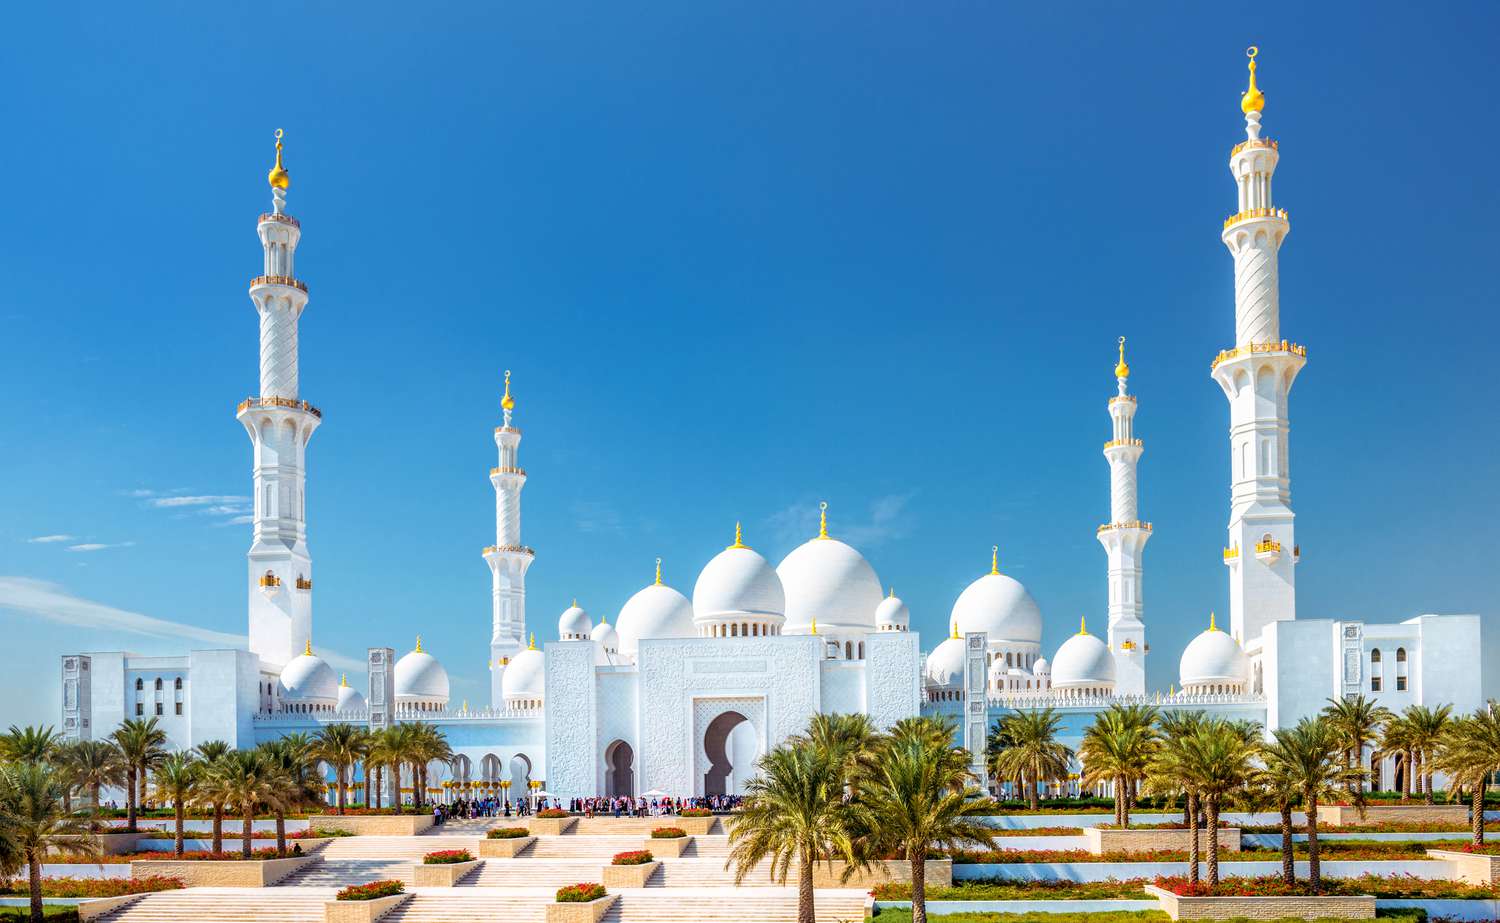 Free experiences in Abu Dhabi that will make your trip special